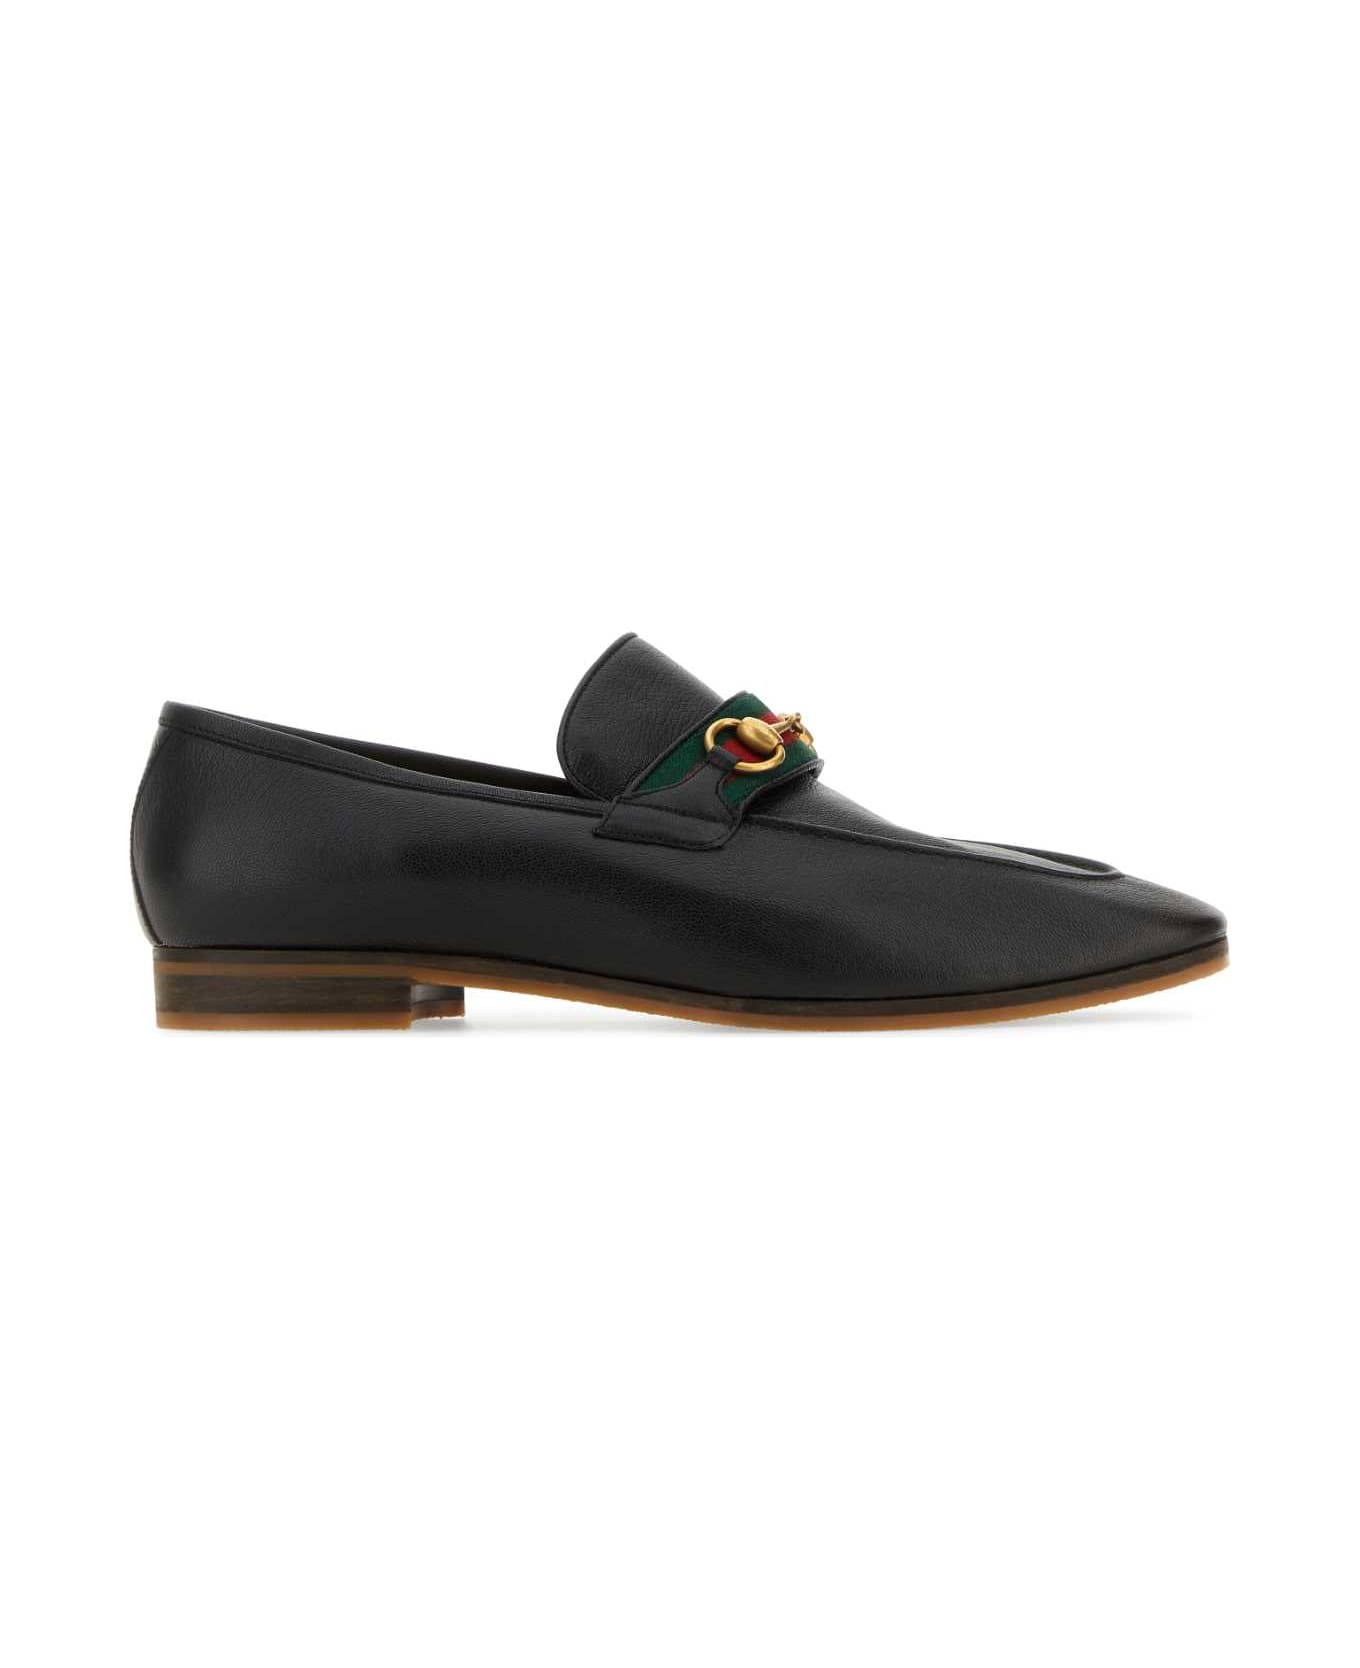 Gucci Black Leather Loafers - BLK